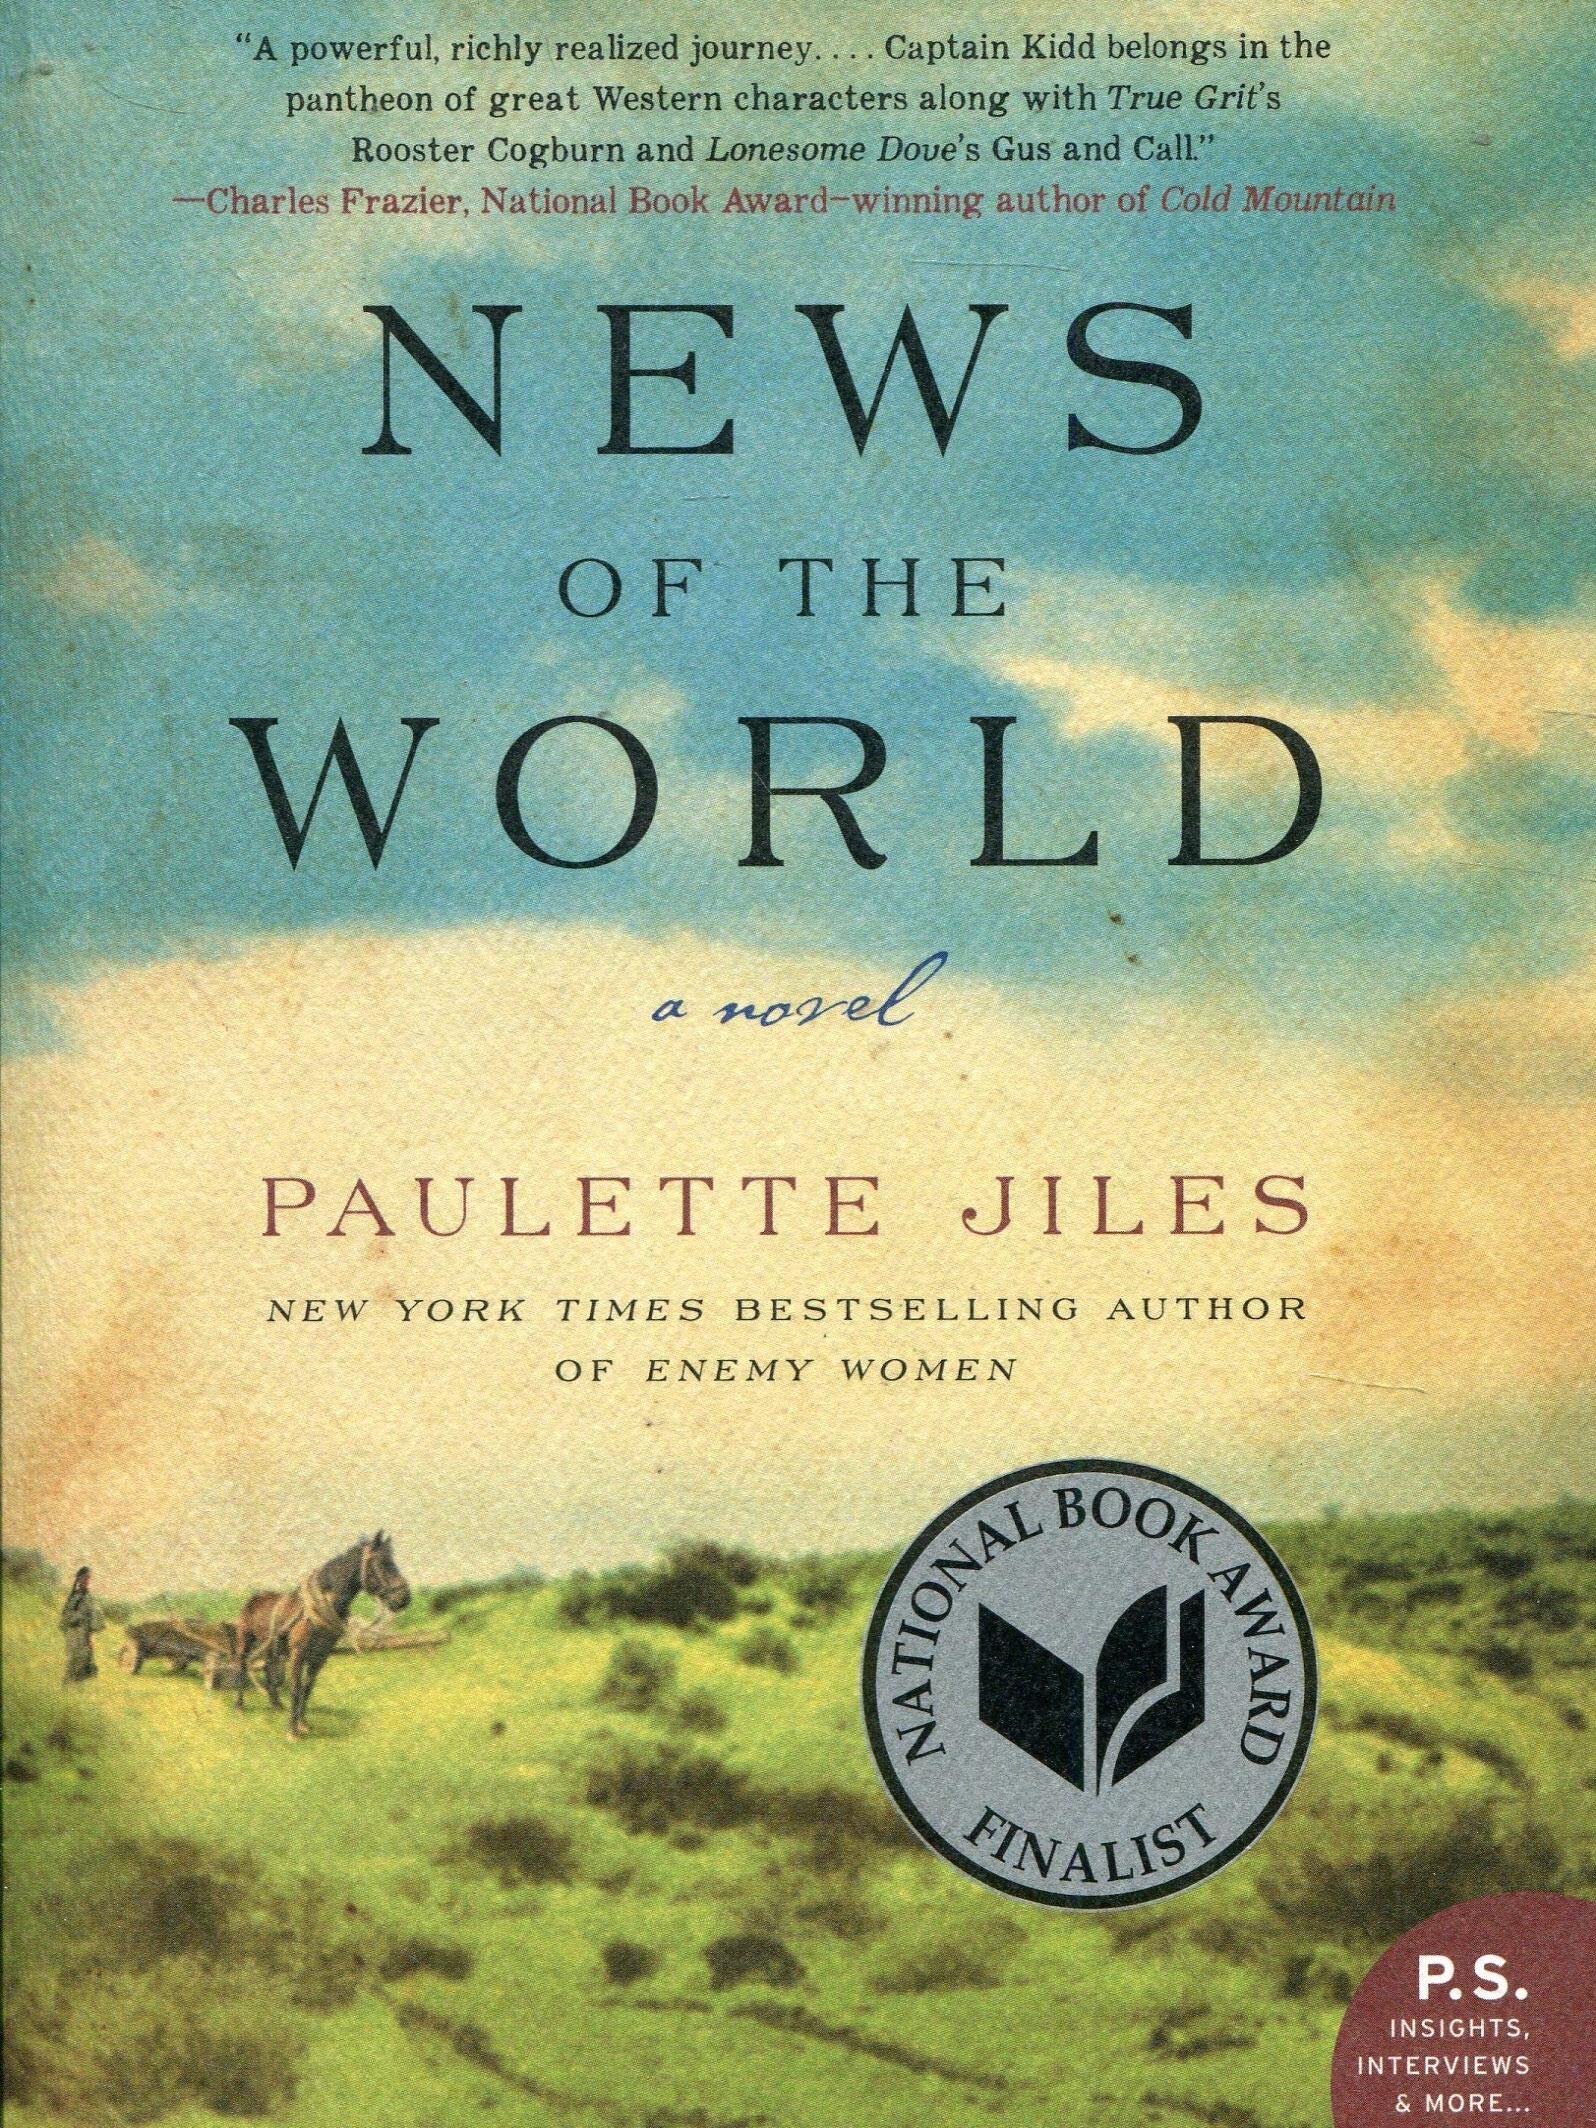 News of the World by Paulette Jiles